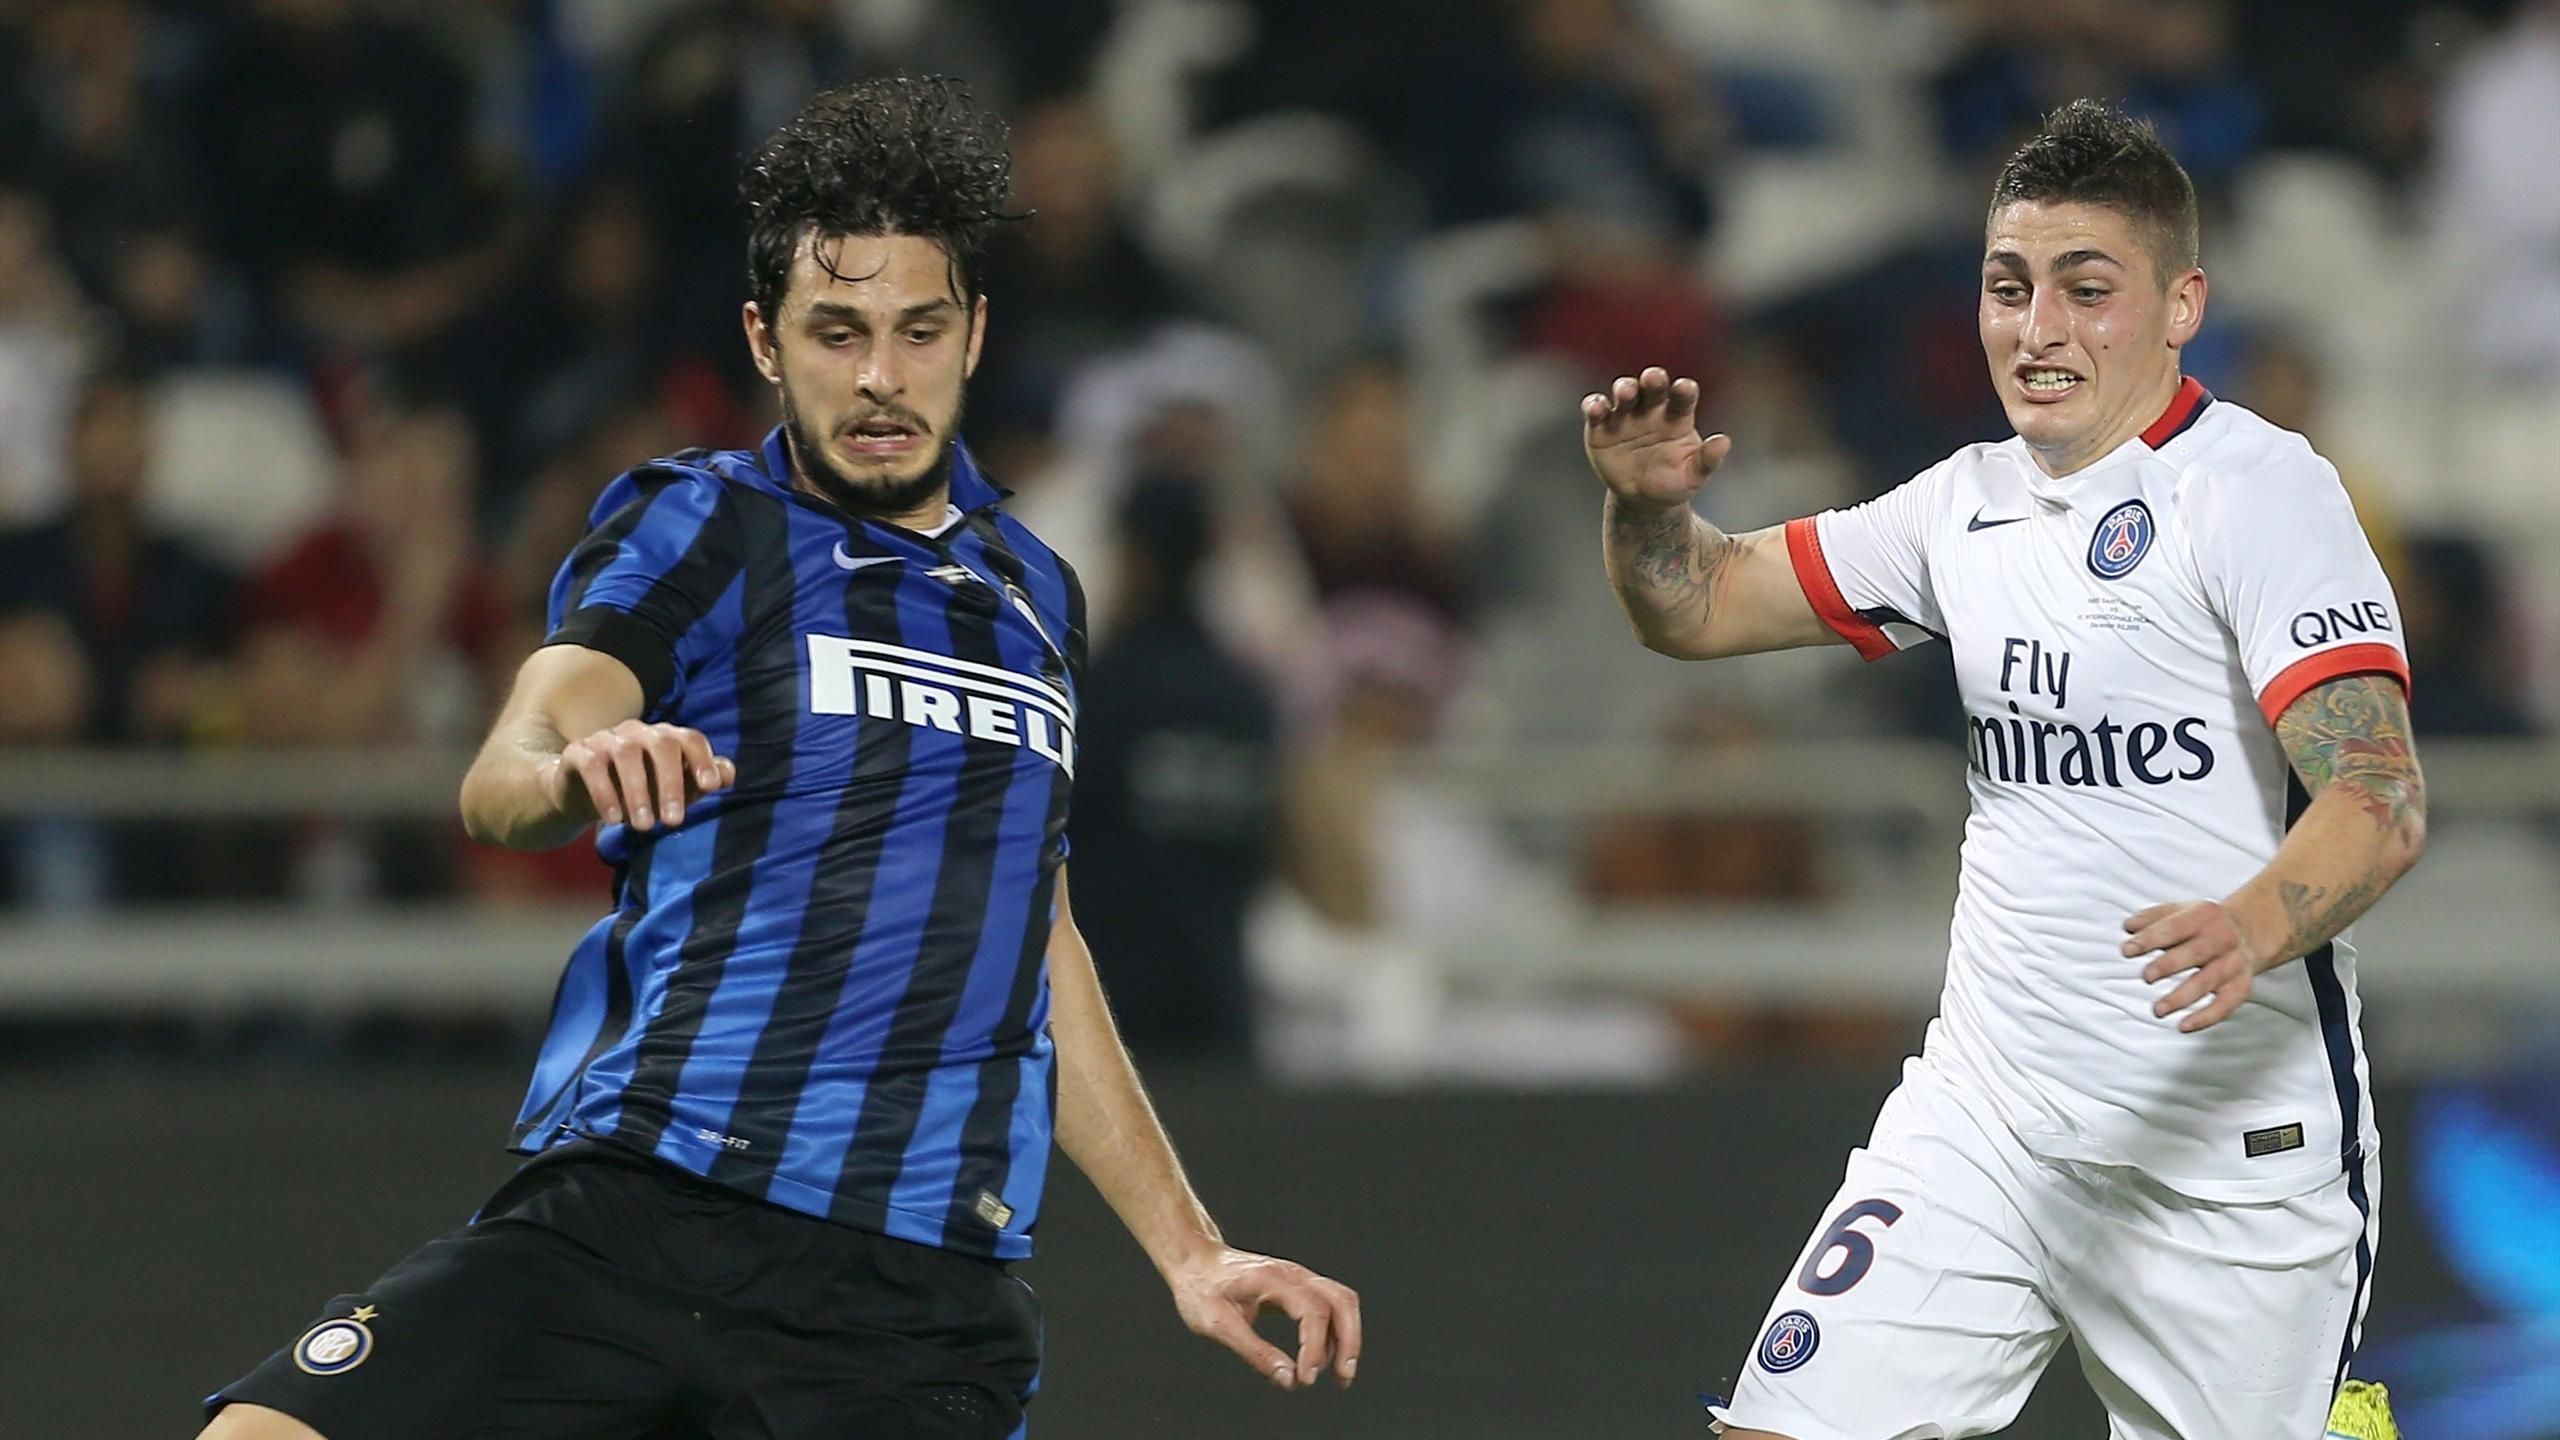 Inter Milan defender Andrea Ranocchia, right, challenges AC Milan